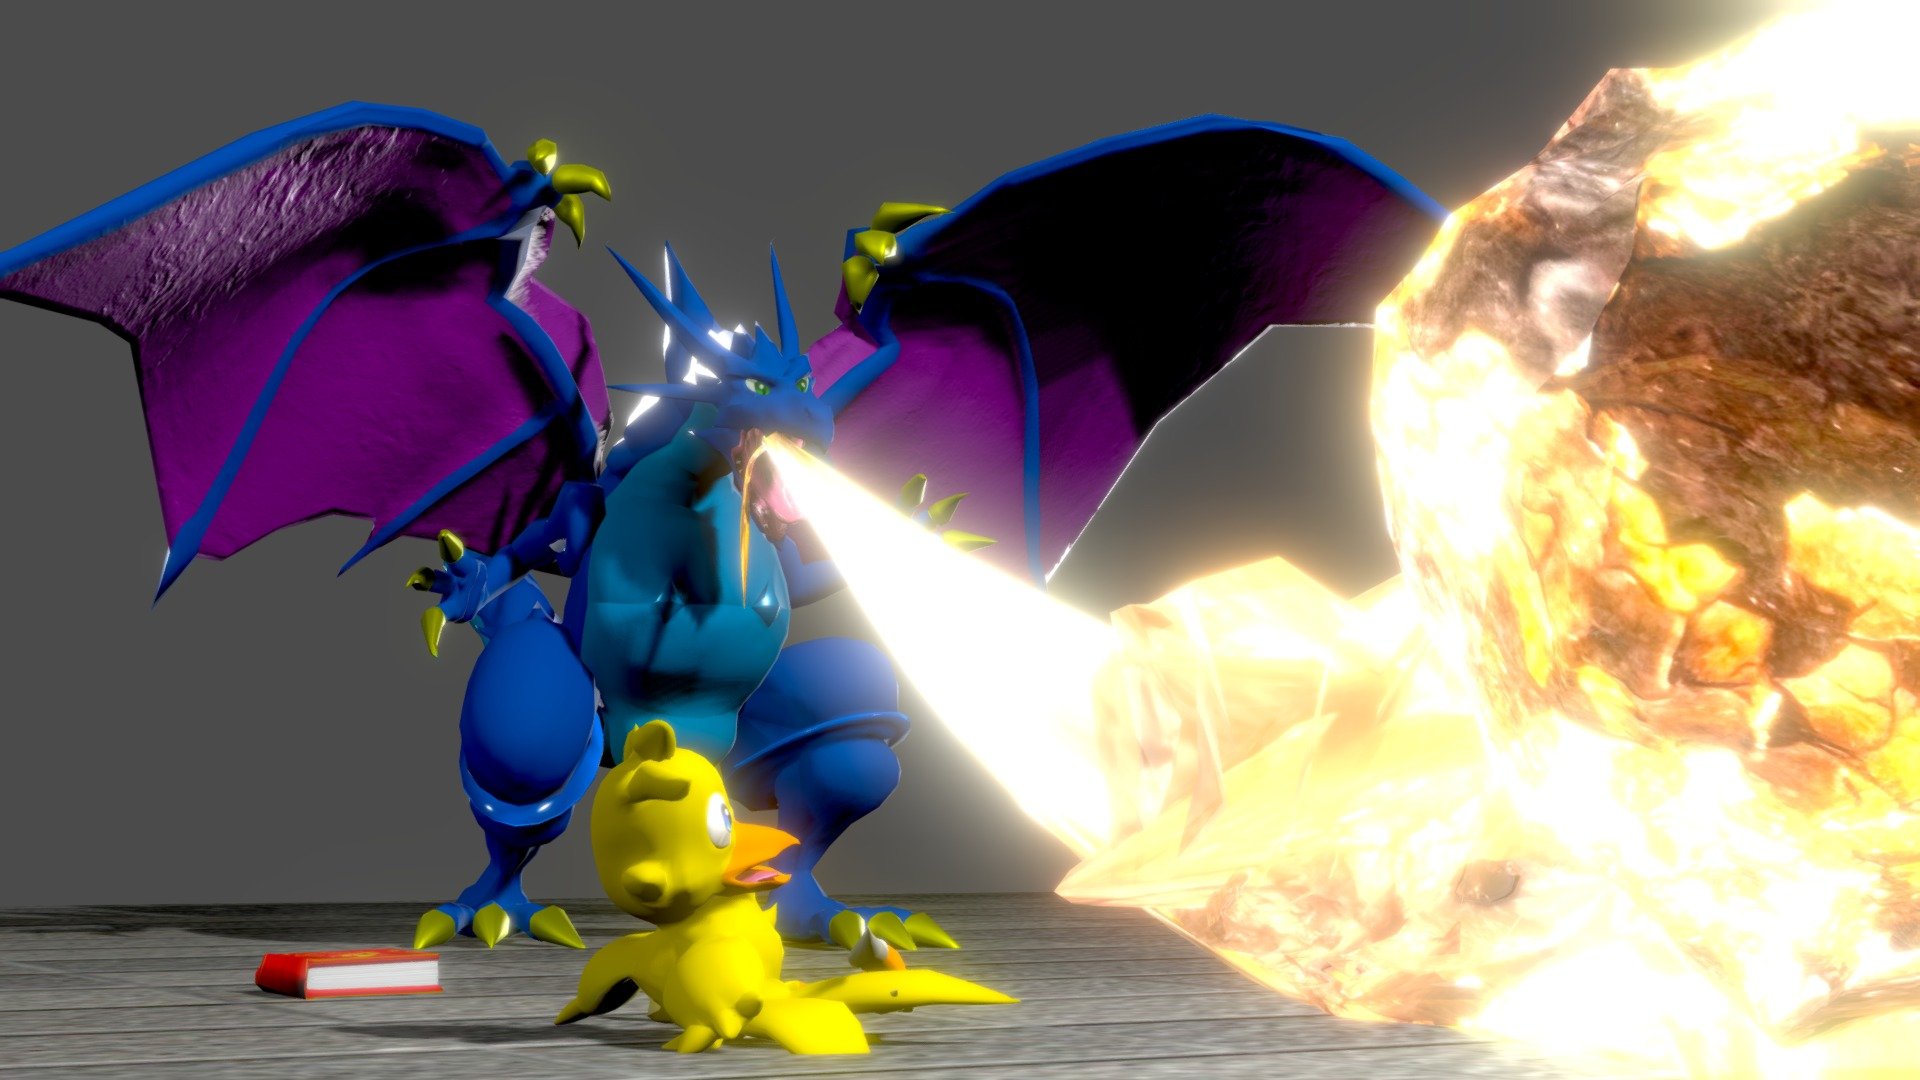 This is my first new work in 4 years.
The Bahamut in the Chocobo's Dungeon world is my favorite dragon. also chocobo is cute and so brave.
I felt a sense of familiarity when I looked at Sketchfab's settings for the first time in 4 years and saw that they had not changed much 3d model